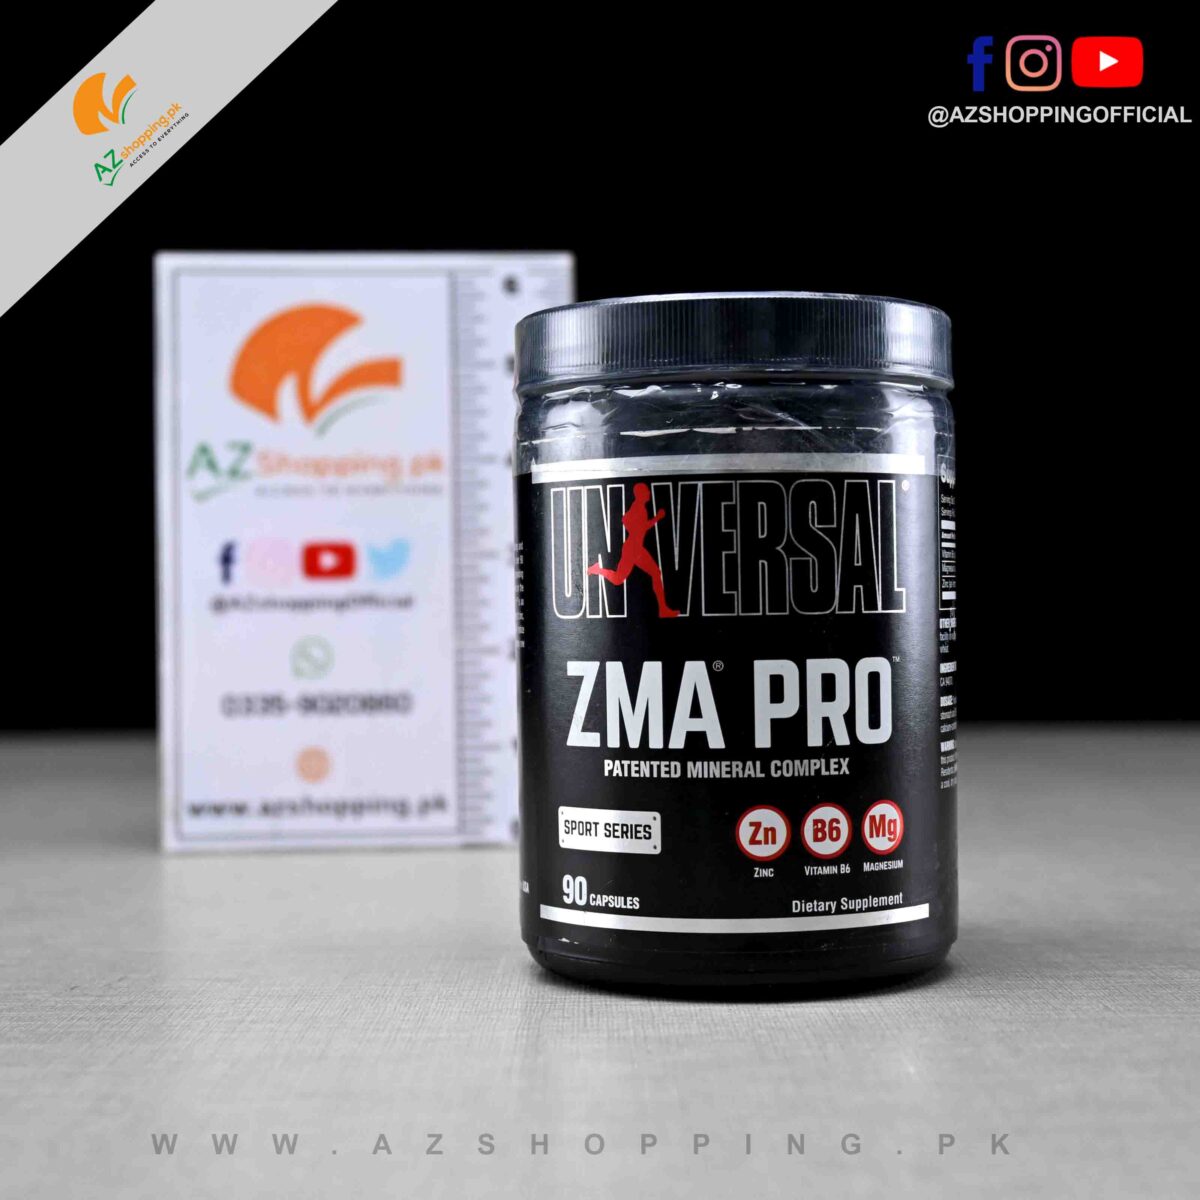 Universal Nutrition – ZMA PRO Patented Mineral Complex (Zinc, Vitamin B6, Magnesium) To Increase Strength, Growth & Recovery and Nighttime Recovery Aid for Better Sleep - 90 Capsules